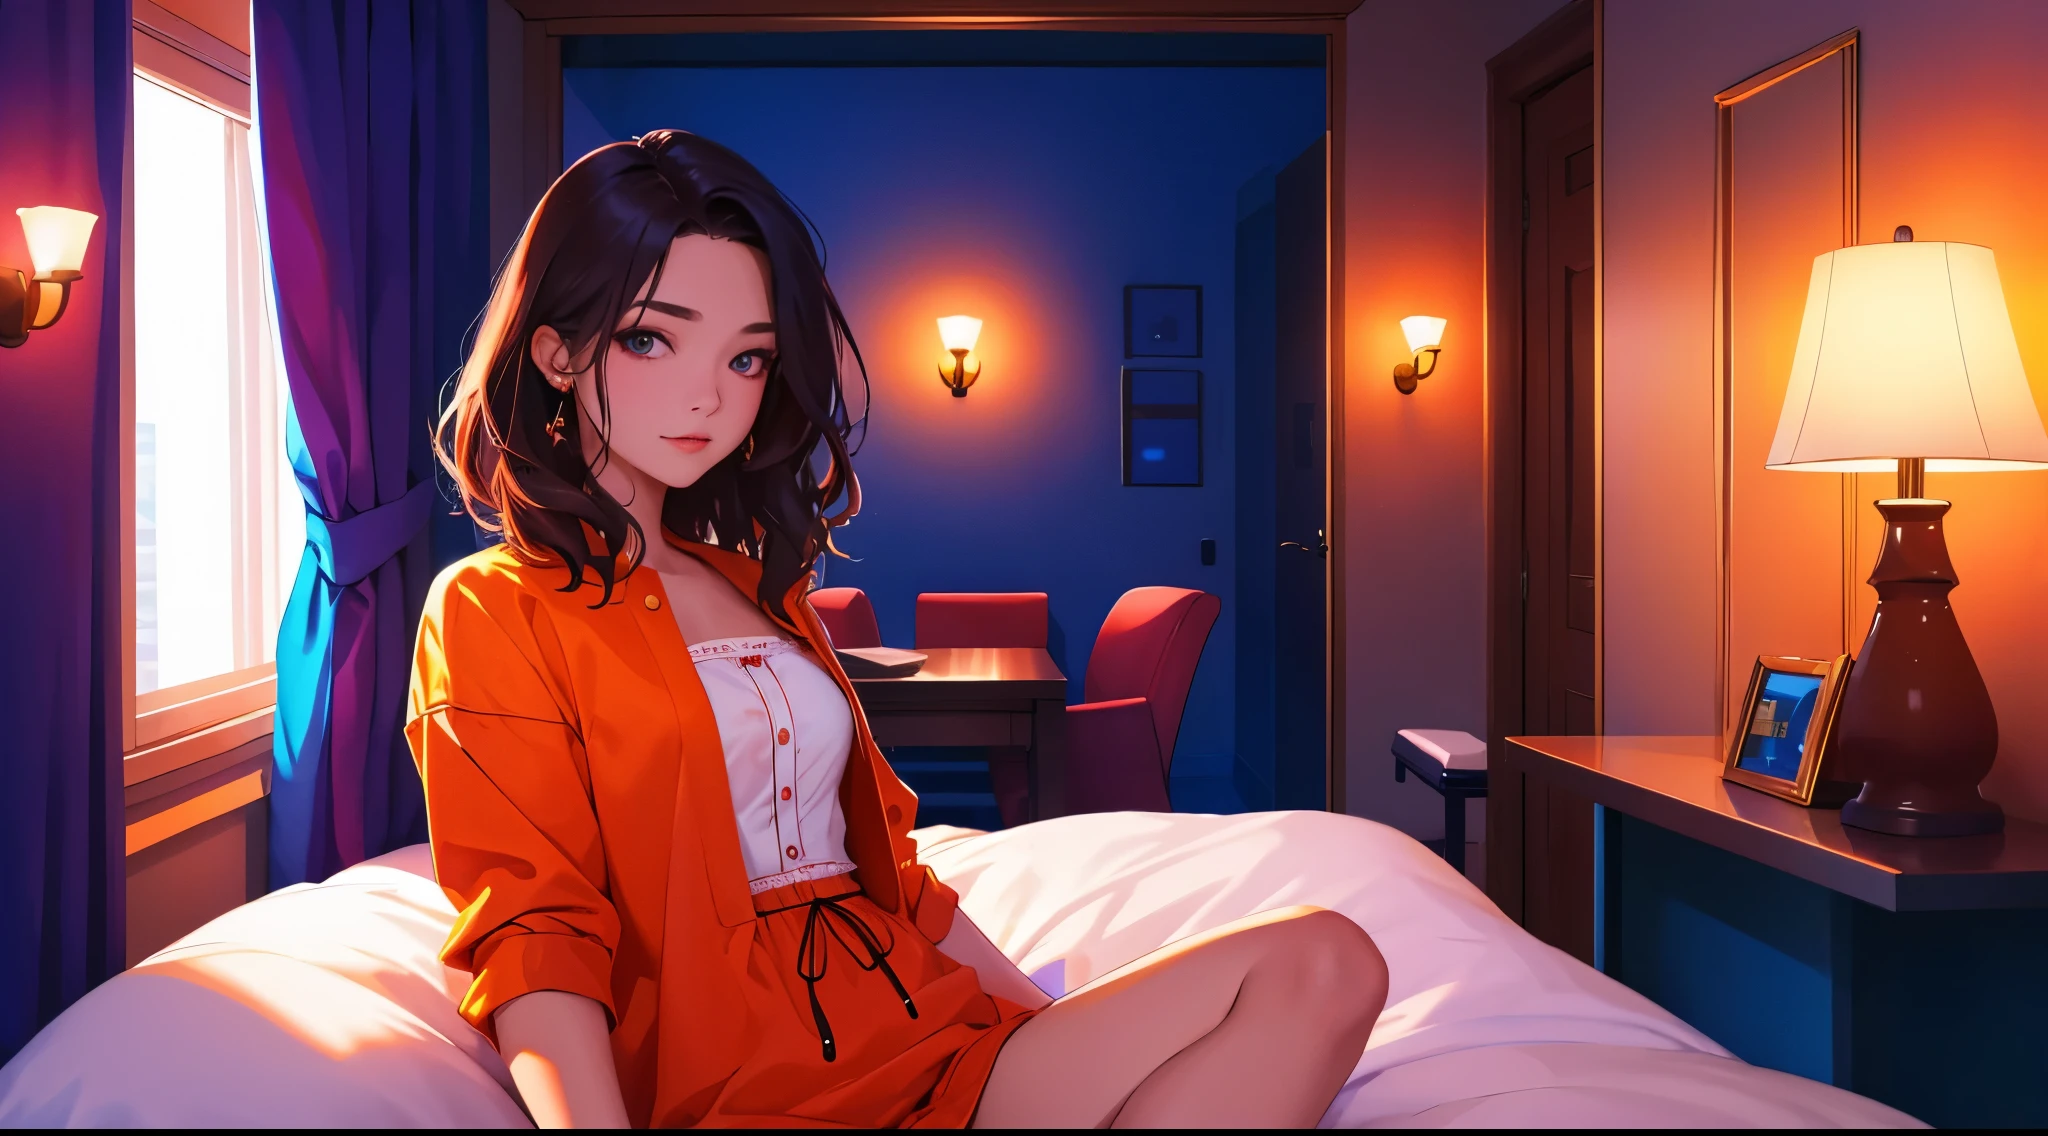 tmasterpiece, Best quality at best, 1 girl, Alone, Influencers, Deep dark background, In the room at night，A girl is picked up in bed，The expression is very